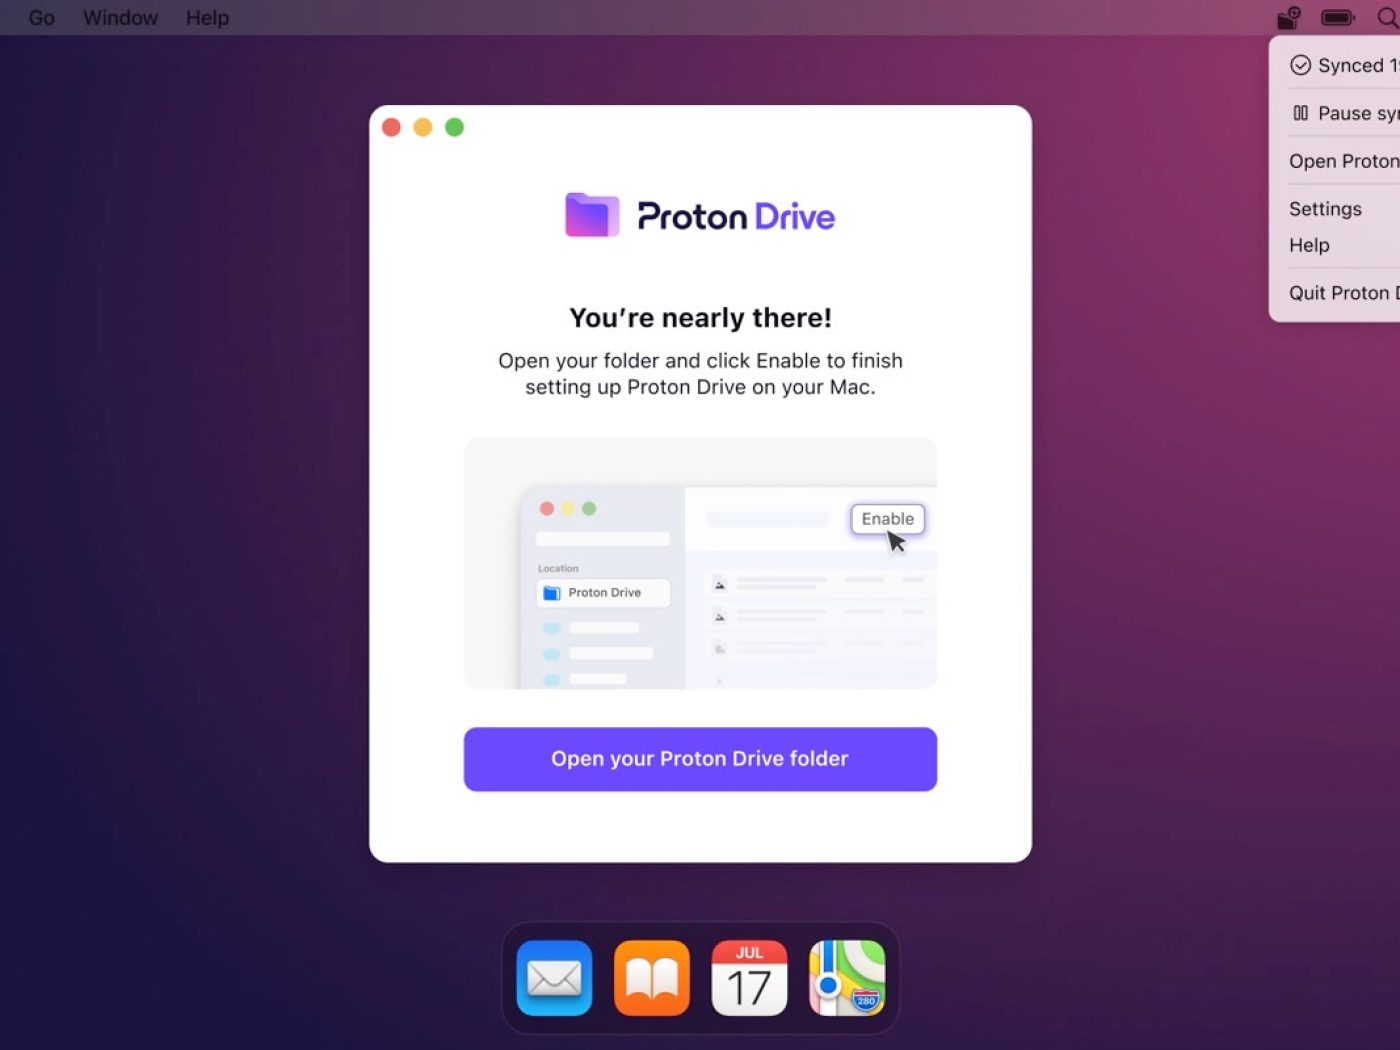 Download Proton Drive for Windows, Android, or iOS